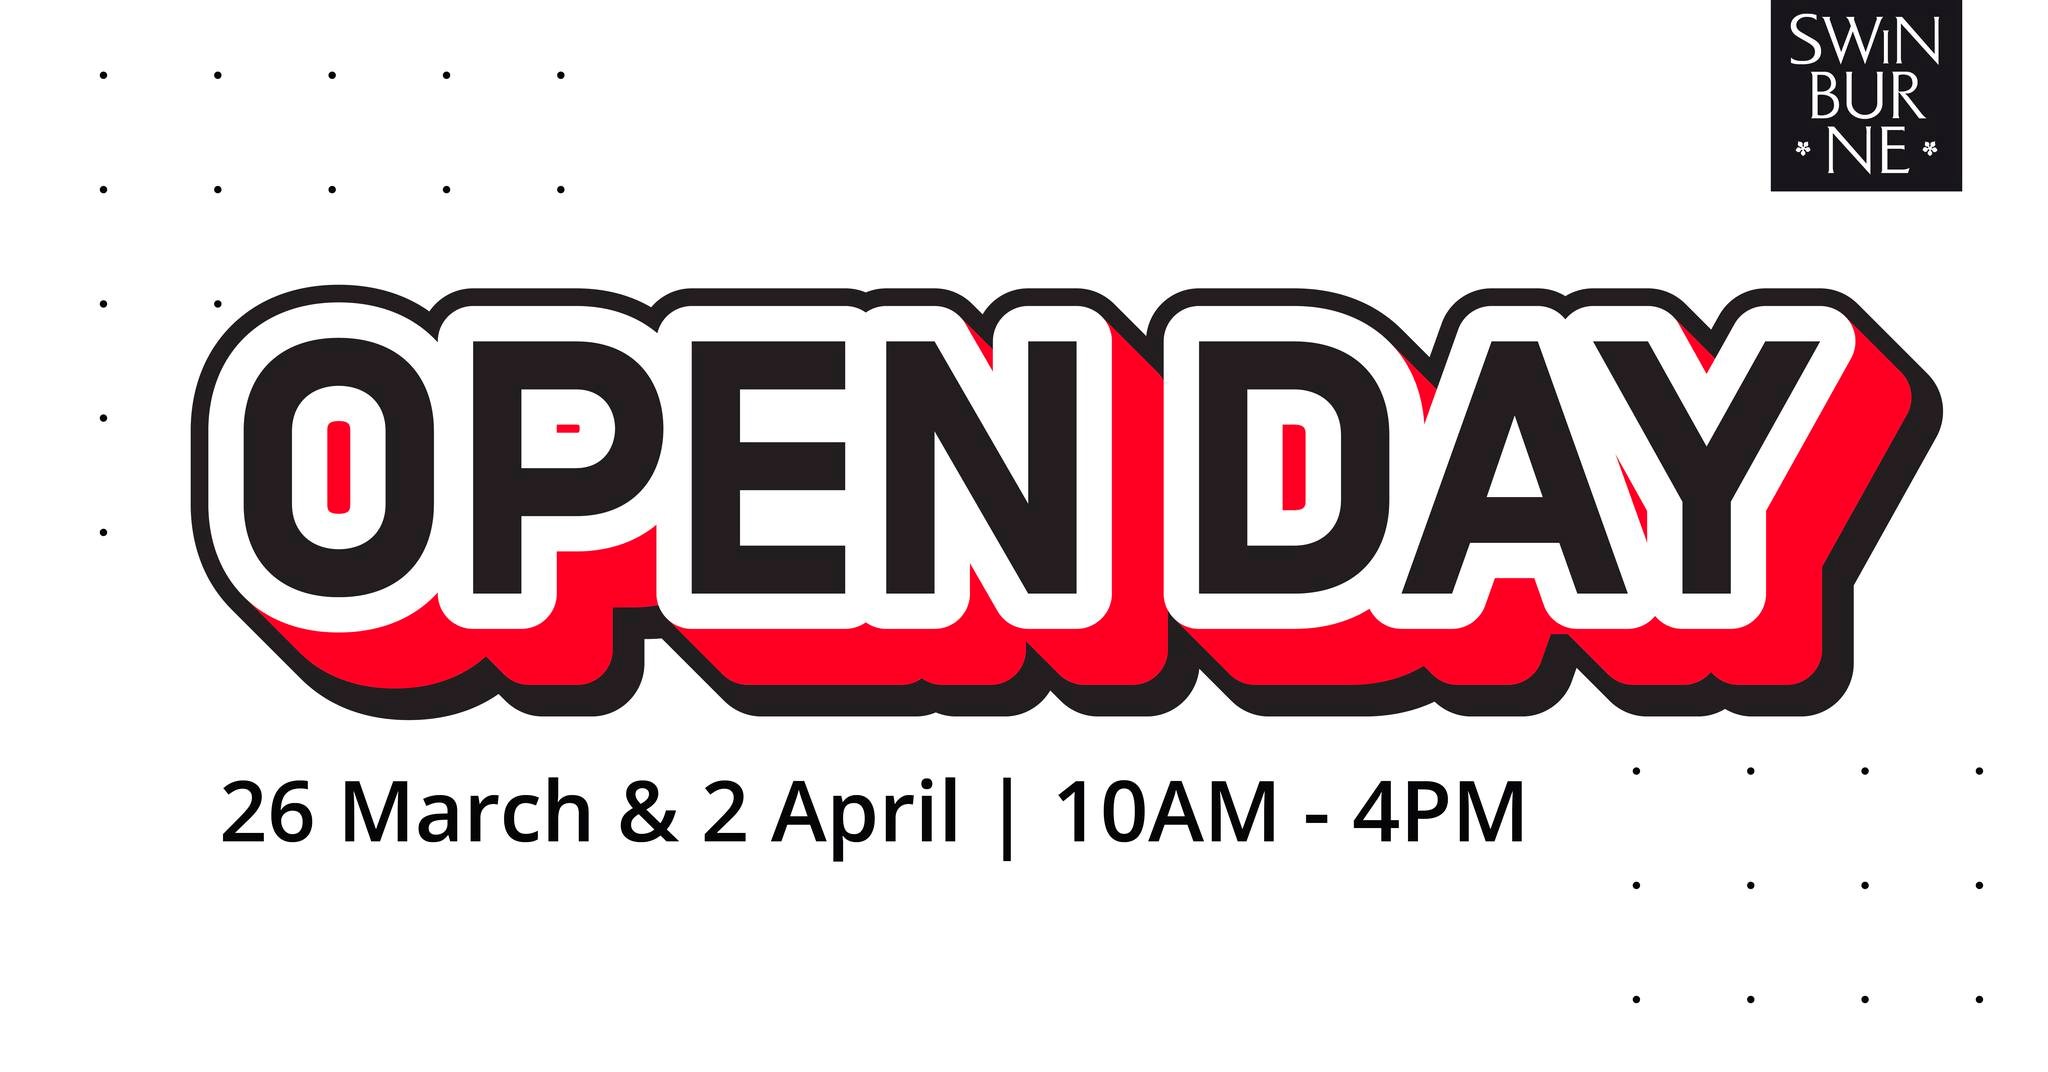 Visit Swinburne Sarawak’s Open Day events from 10am to 4pm on 26 March and 2 April, held at the campus itself. 